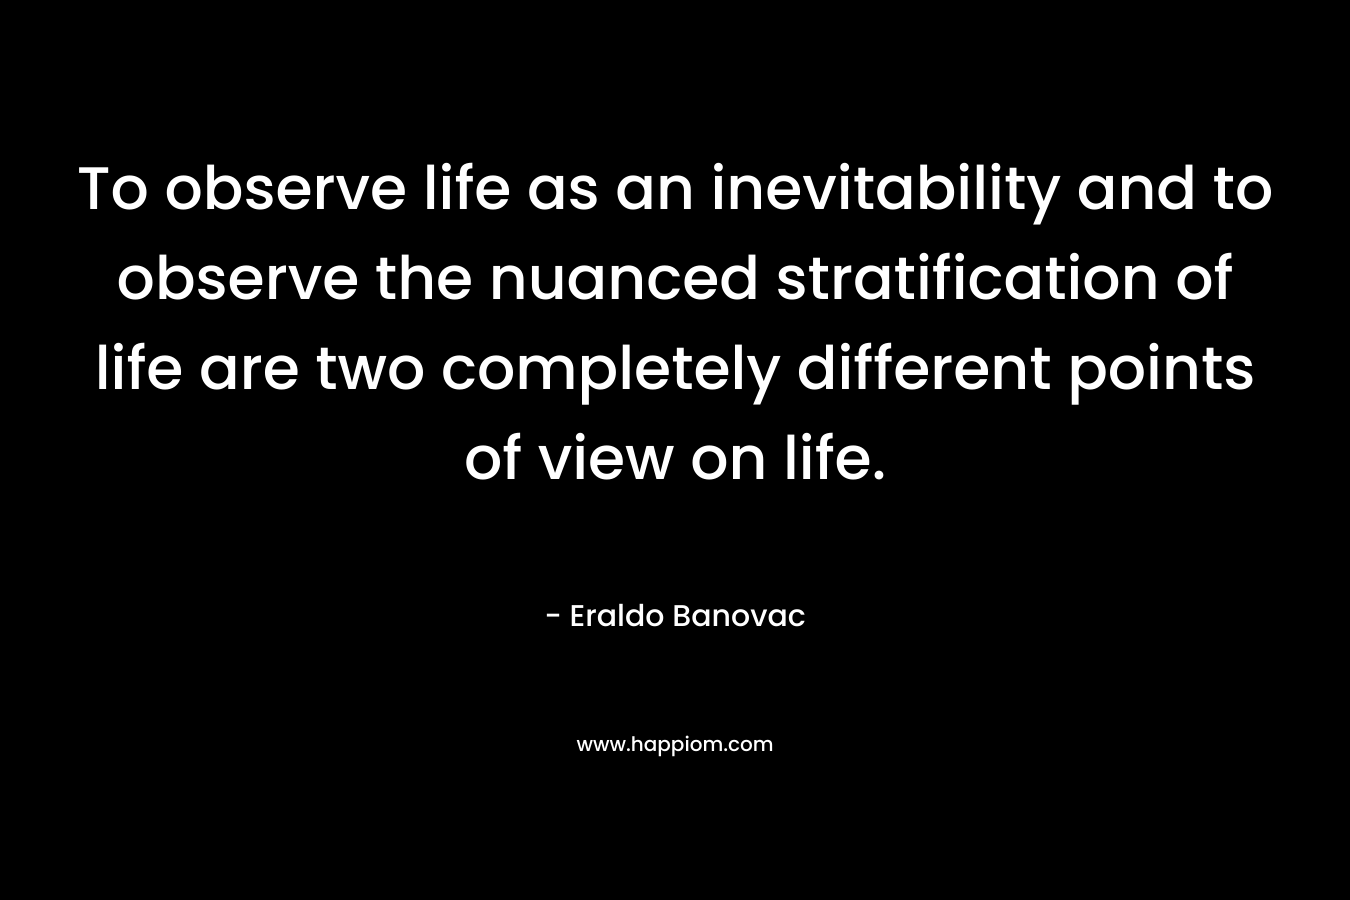 To observe life as an inevitability and to observe the nuanced stratification of life are two completely different points of view on life. – Eraldo Banovac